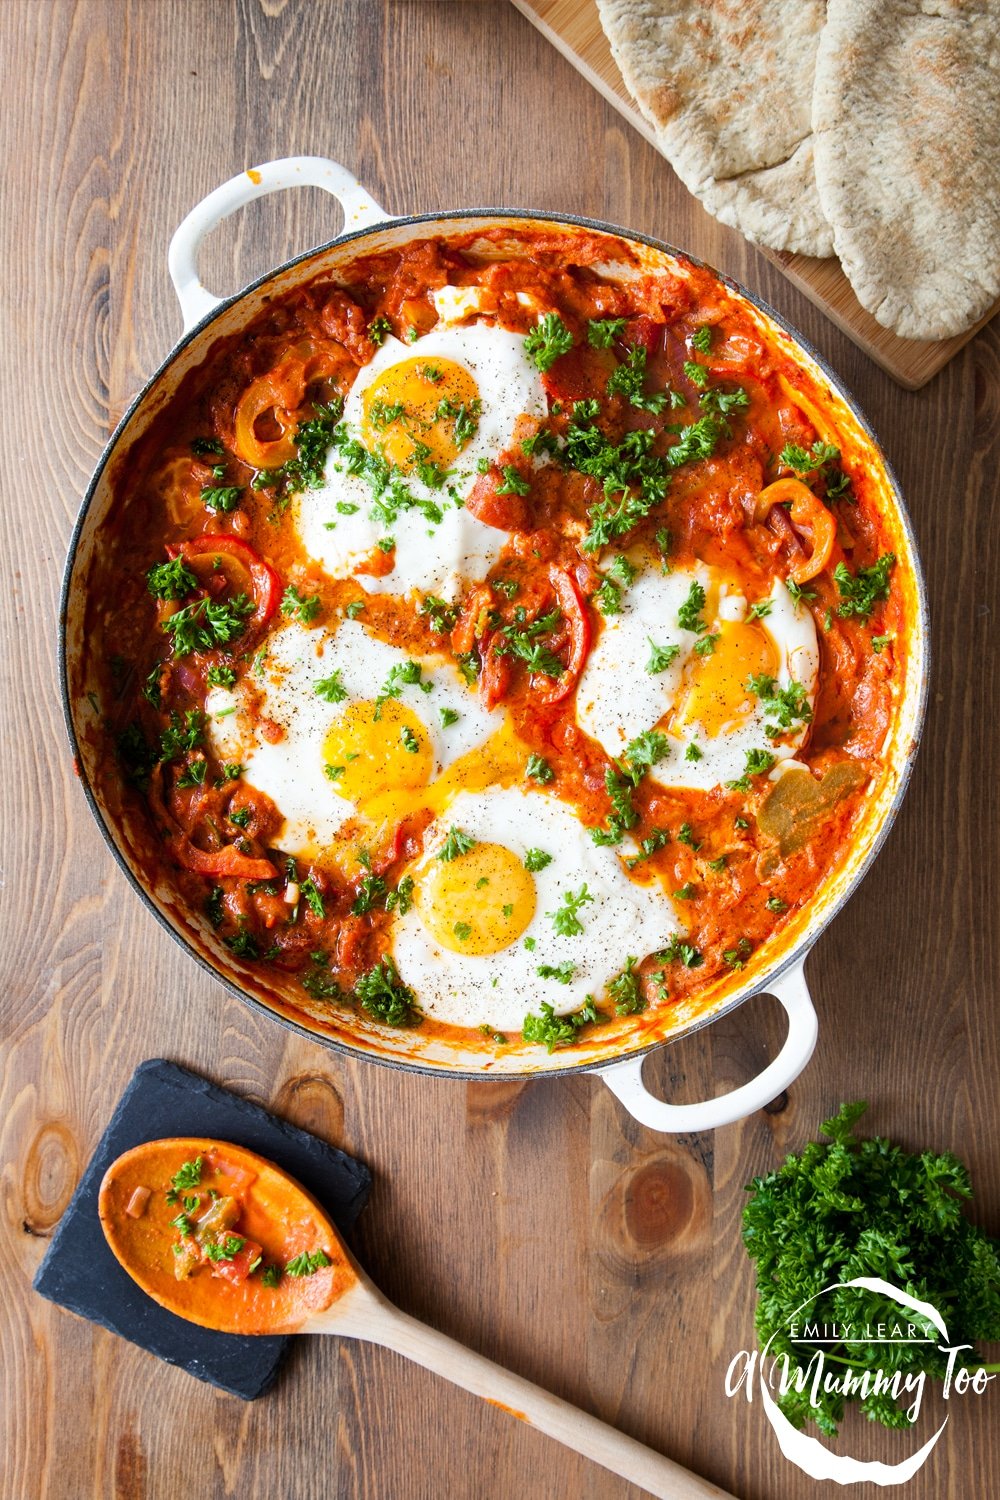 Baked eggs in a spicy tomato bake in a casserole dish